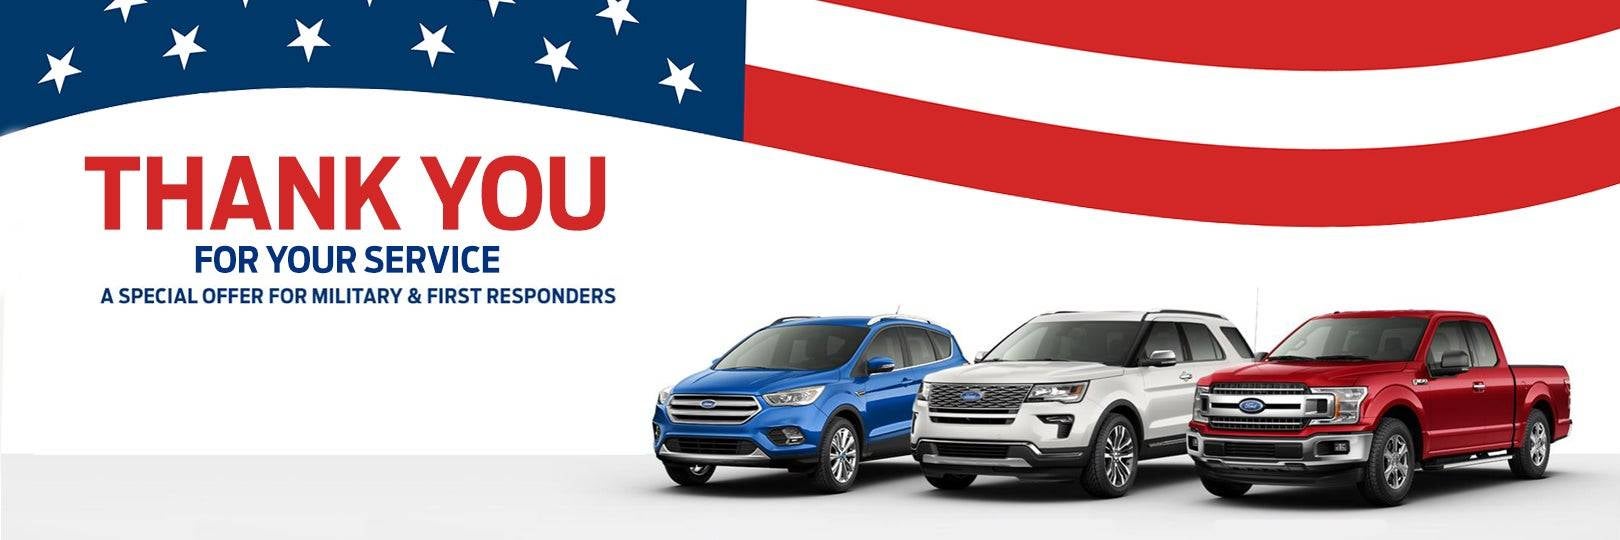 military-first-responders-discount-new-ford-dealership-near-alexandria